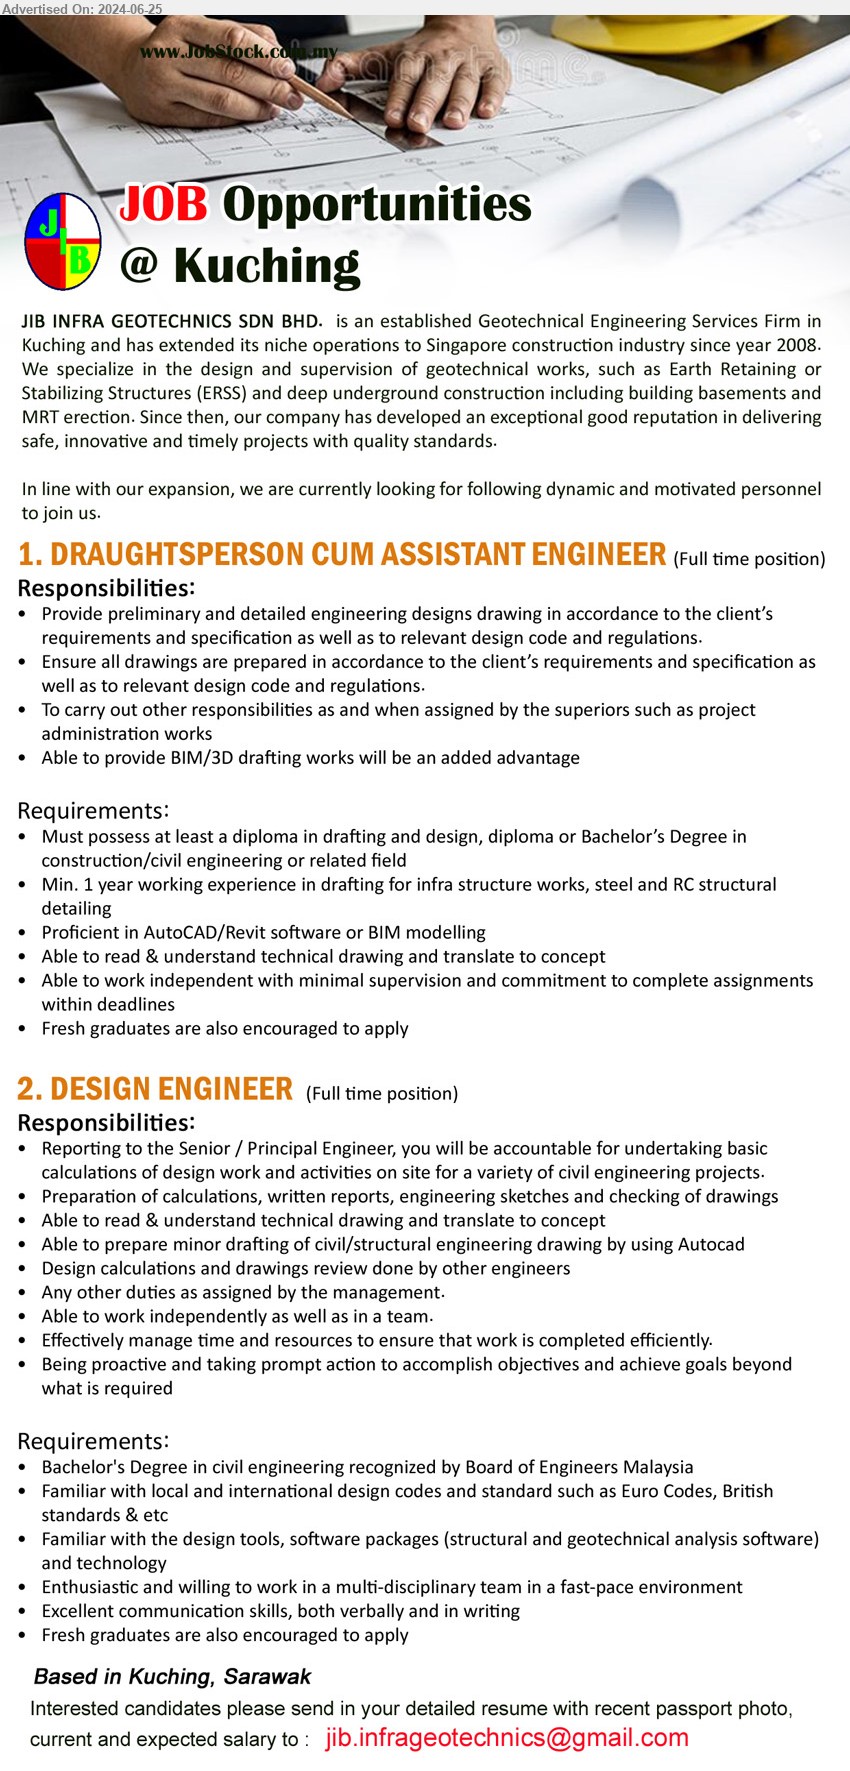 JIB INFRA GEOTECHNICS SDN BHD - 1. DRAUGHTSPERSON CUM ASSISTANT ENGINEER (Kuching), Diploma in drafting and design, Diploma or Bachelor’s Degree in 
Construction/ Civil Engineering,...
2. DESIGN ENGINEER (Kuching), Bachelor's Degree in Civil Engineering recognized by Board of Engineers Malaysia,...
Email resume to ...